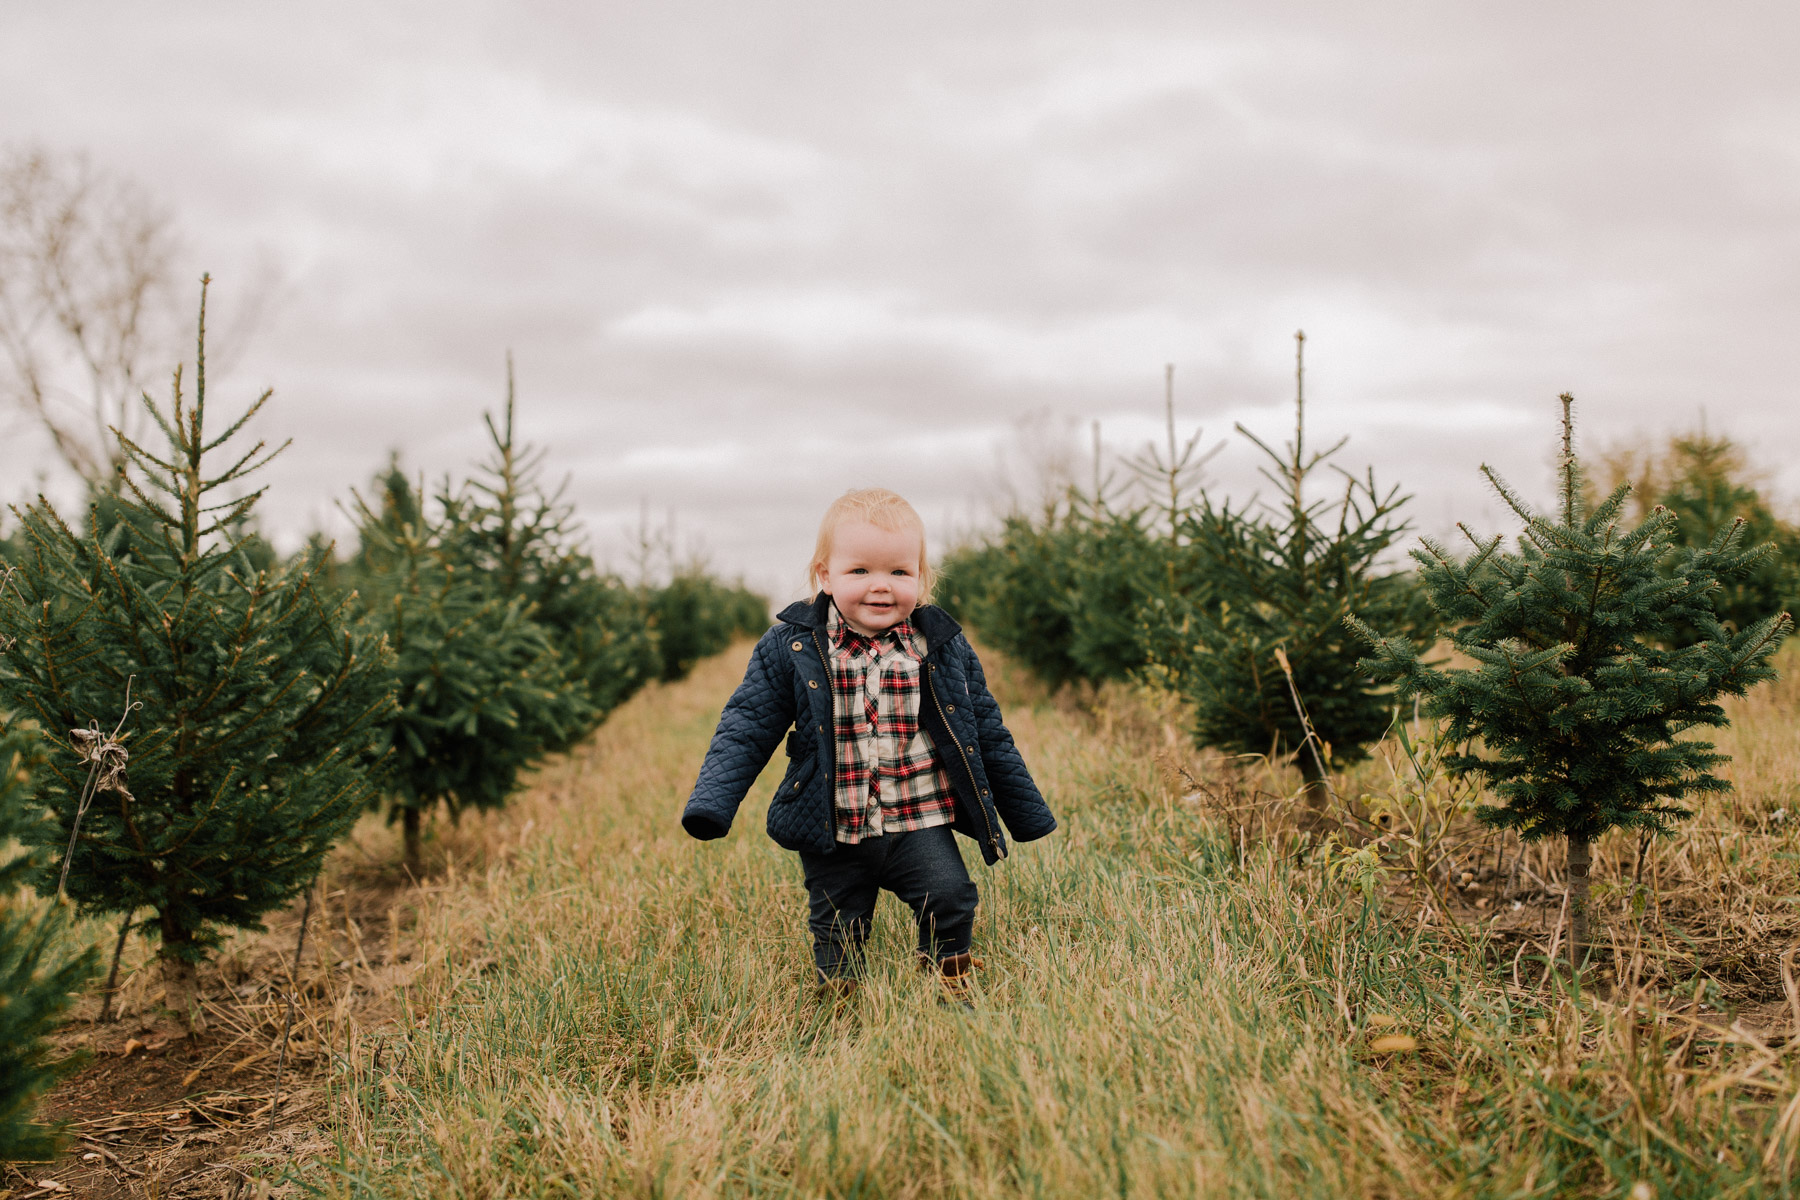 A Visit to the Christmas Tree Farm